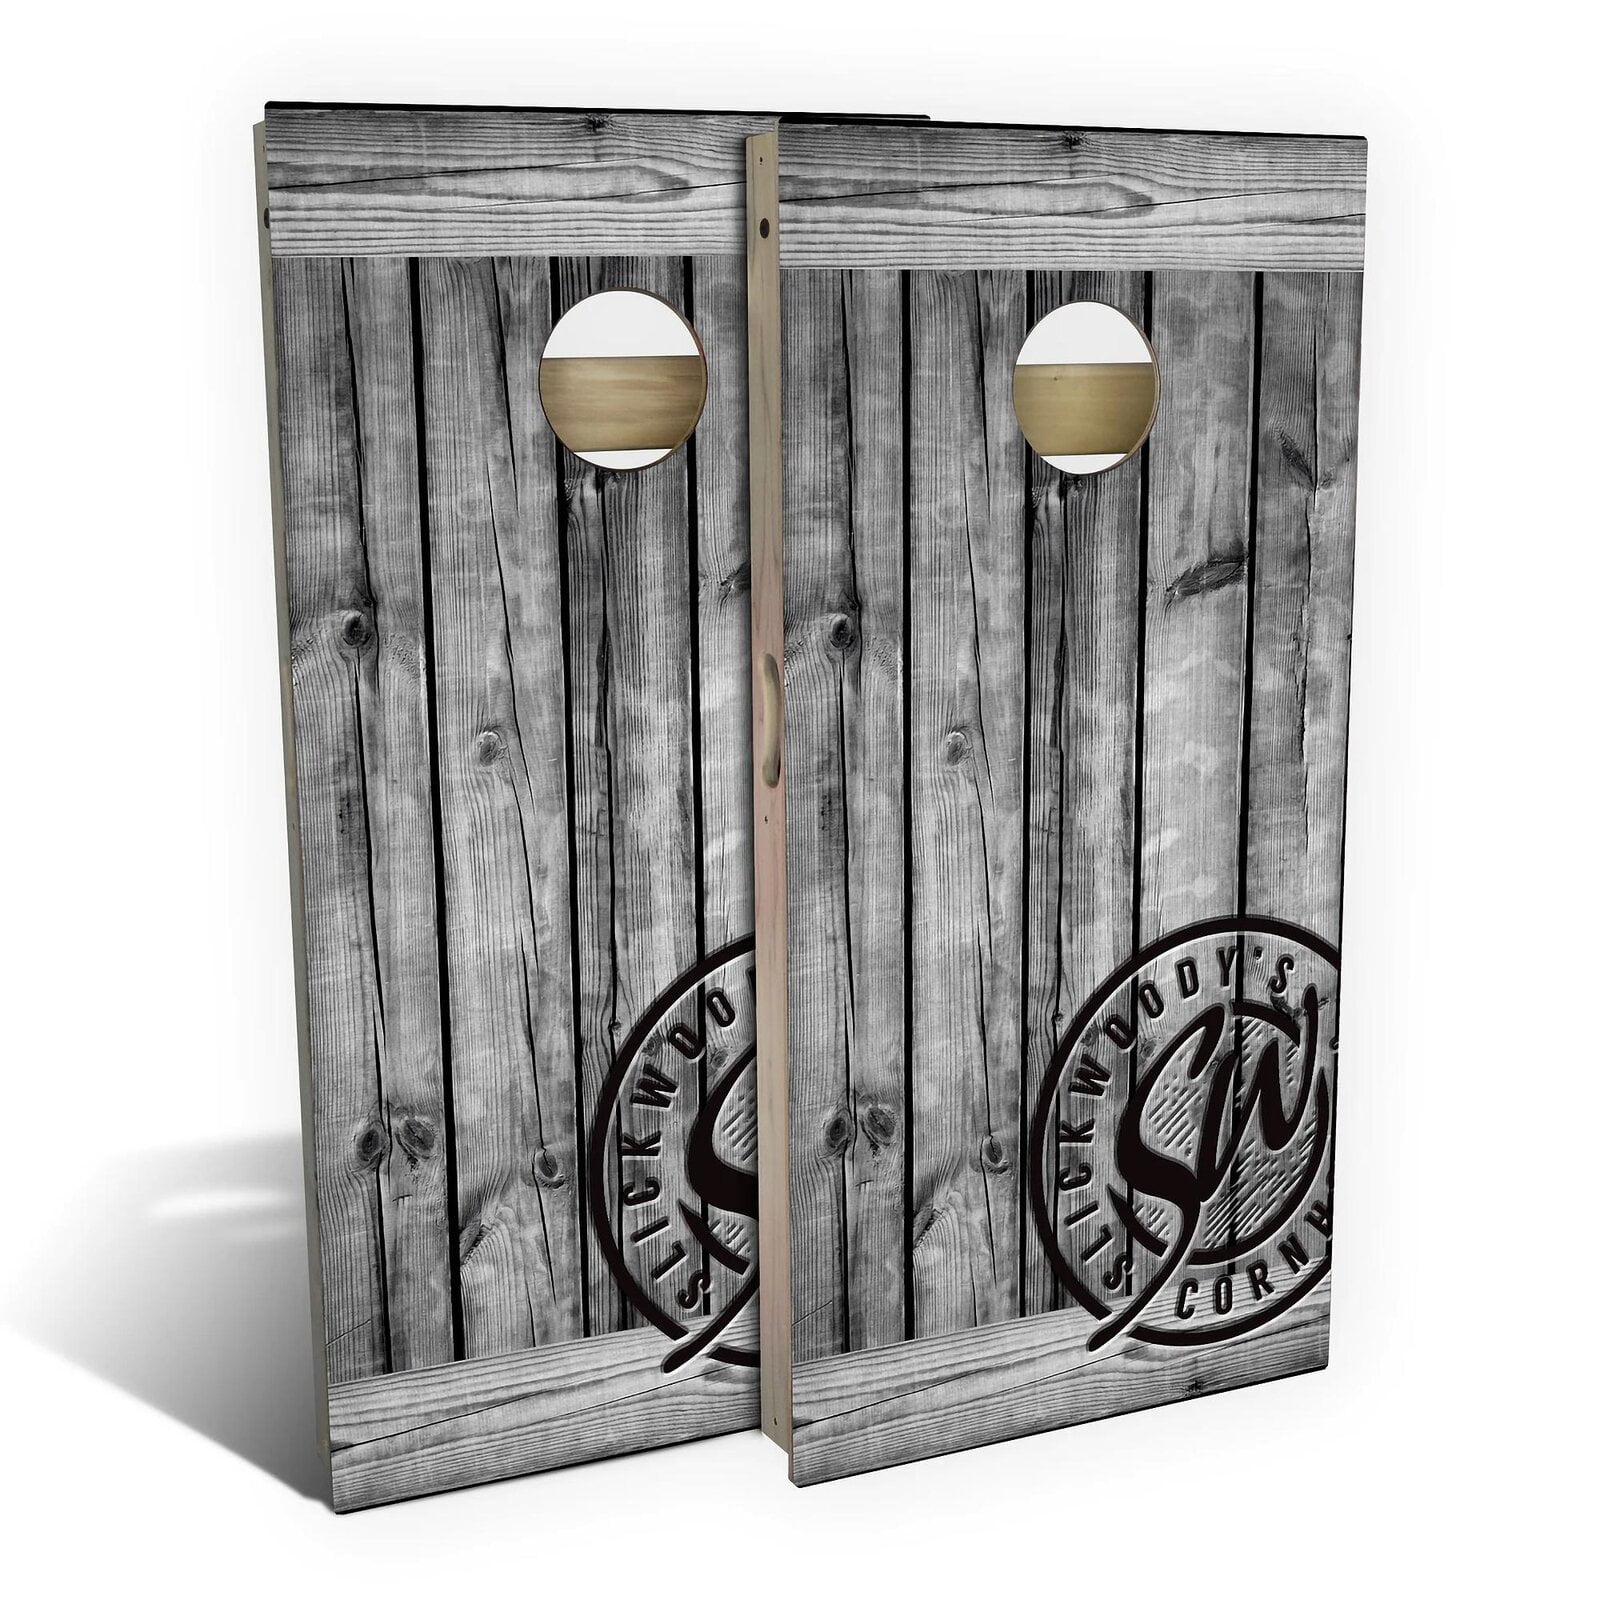 Details about    2'x4' Cornhole Set Includes 2 Premium All-Wood Cornhole Boards and 8 All 